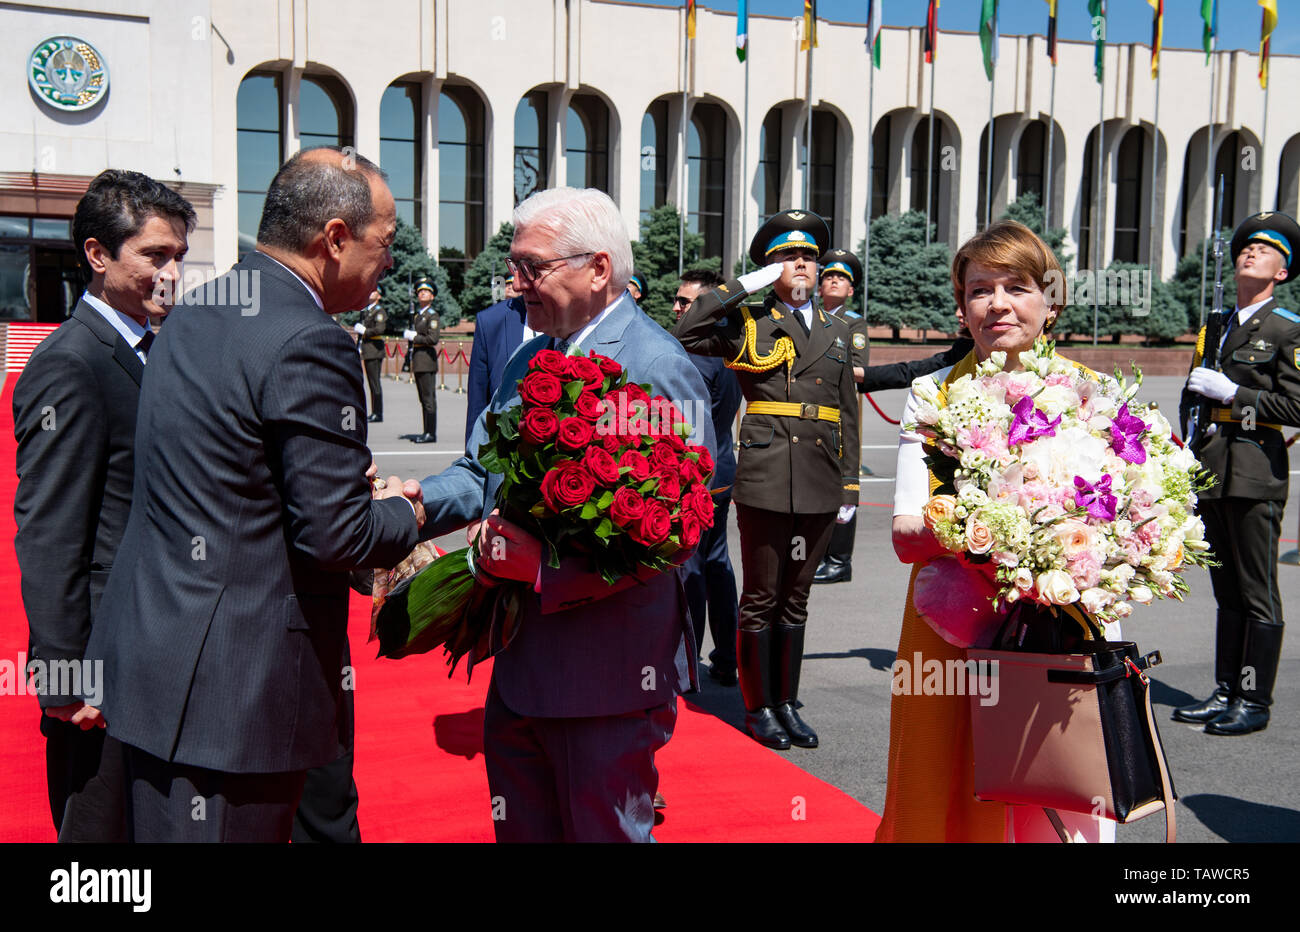 Taschkent, Uzbekistan. 29th May, 2019. Federal President Frank-Walter Steinmeier and his wife Elke Büdenbender board an aircraft of the Bundeswehr Air Mission Wing at Tashkent Airport to continue their flight to Urgantsch. Abdulla Aripov (2nd from left), Prime Minister of Uzbekistan, says them goodbye. President Steinmeier and his wife are on a two-day state visit to Uzbekistan. They are accompanied by numerous business representatives and cultural workers. Credit: Bernd von Jutrczenka/dpa/Alamy Live News Stock Photo